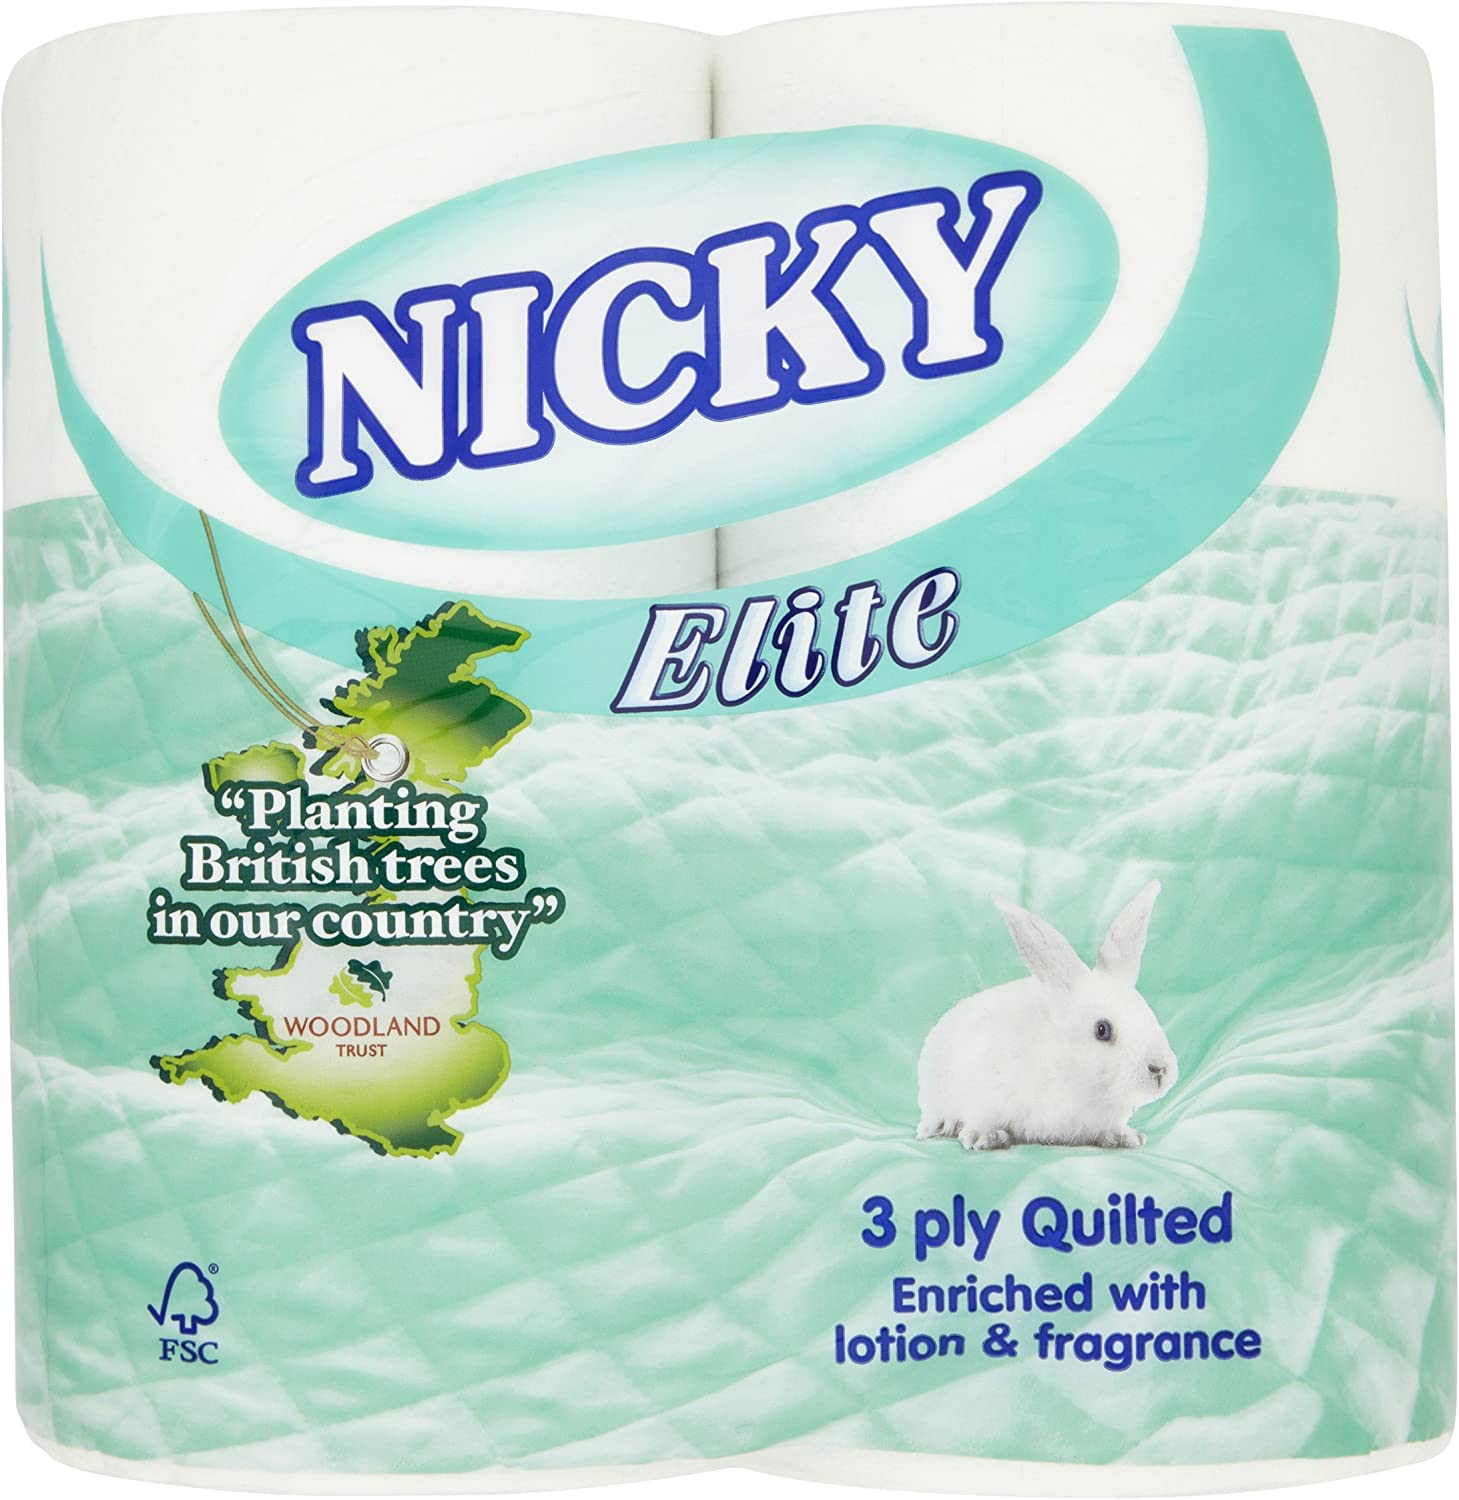 Nicky Elite Enriched with Lotion & Fragrance 3 Ply Quilted 4 Rolls RRP 2.99 CLEARANCE 2.50